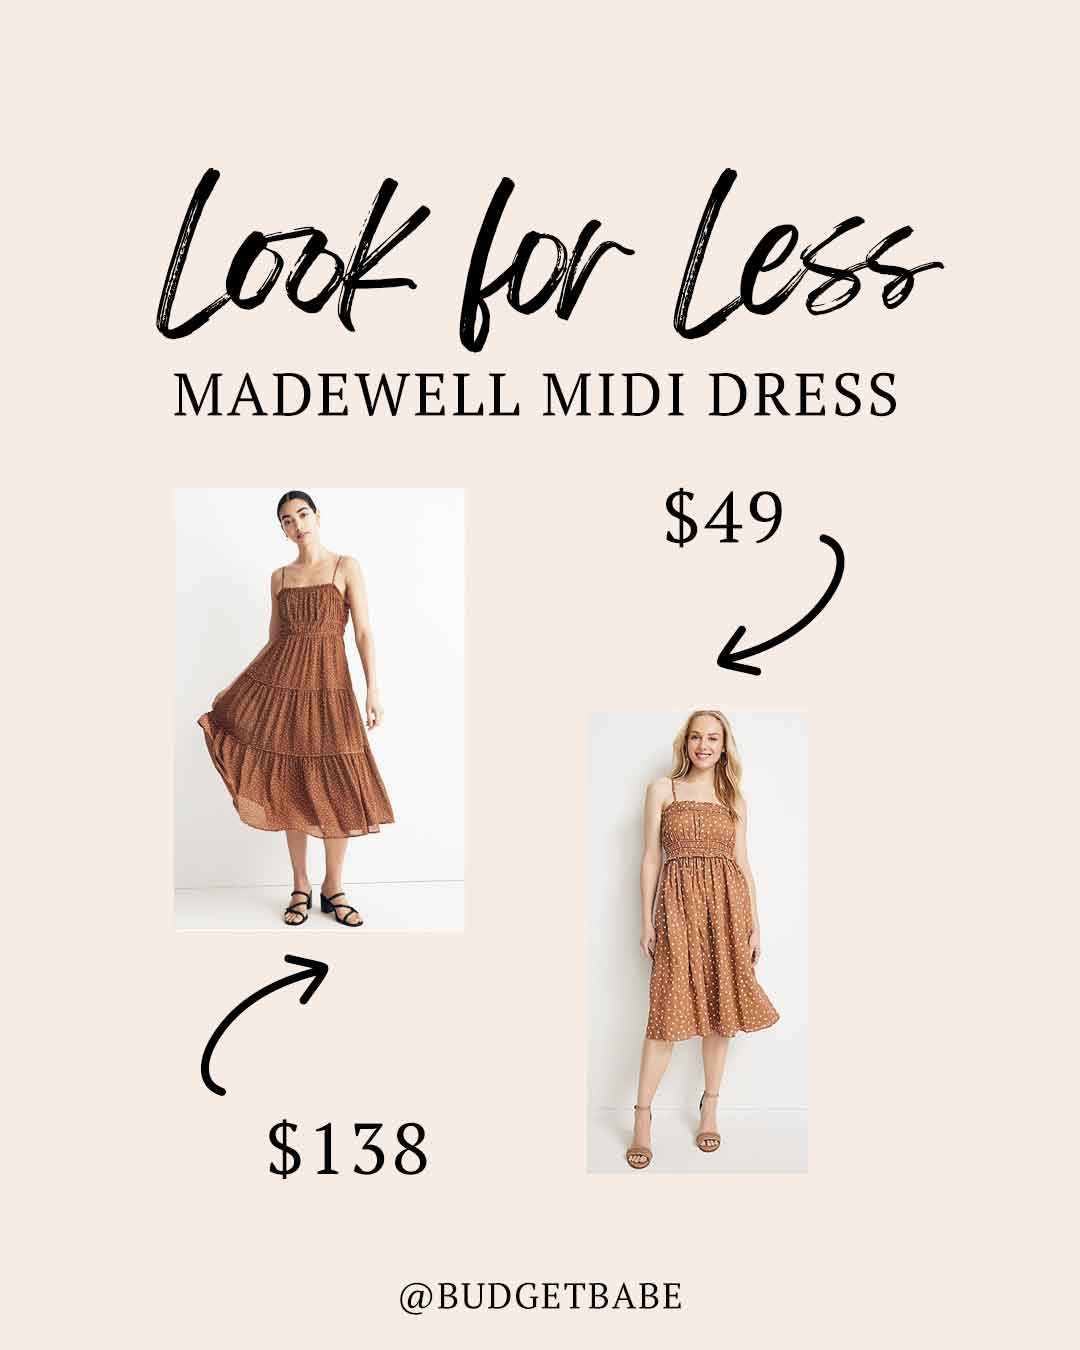 Madewell midi dress look for less at Maurices!